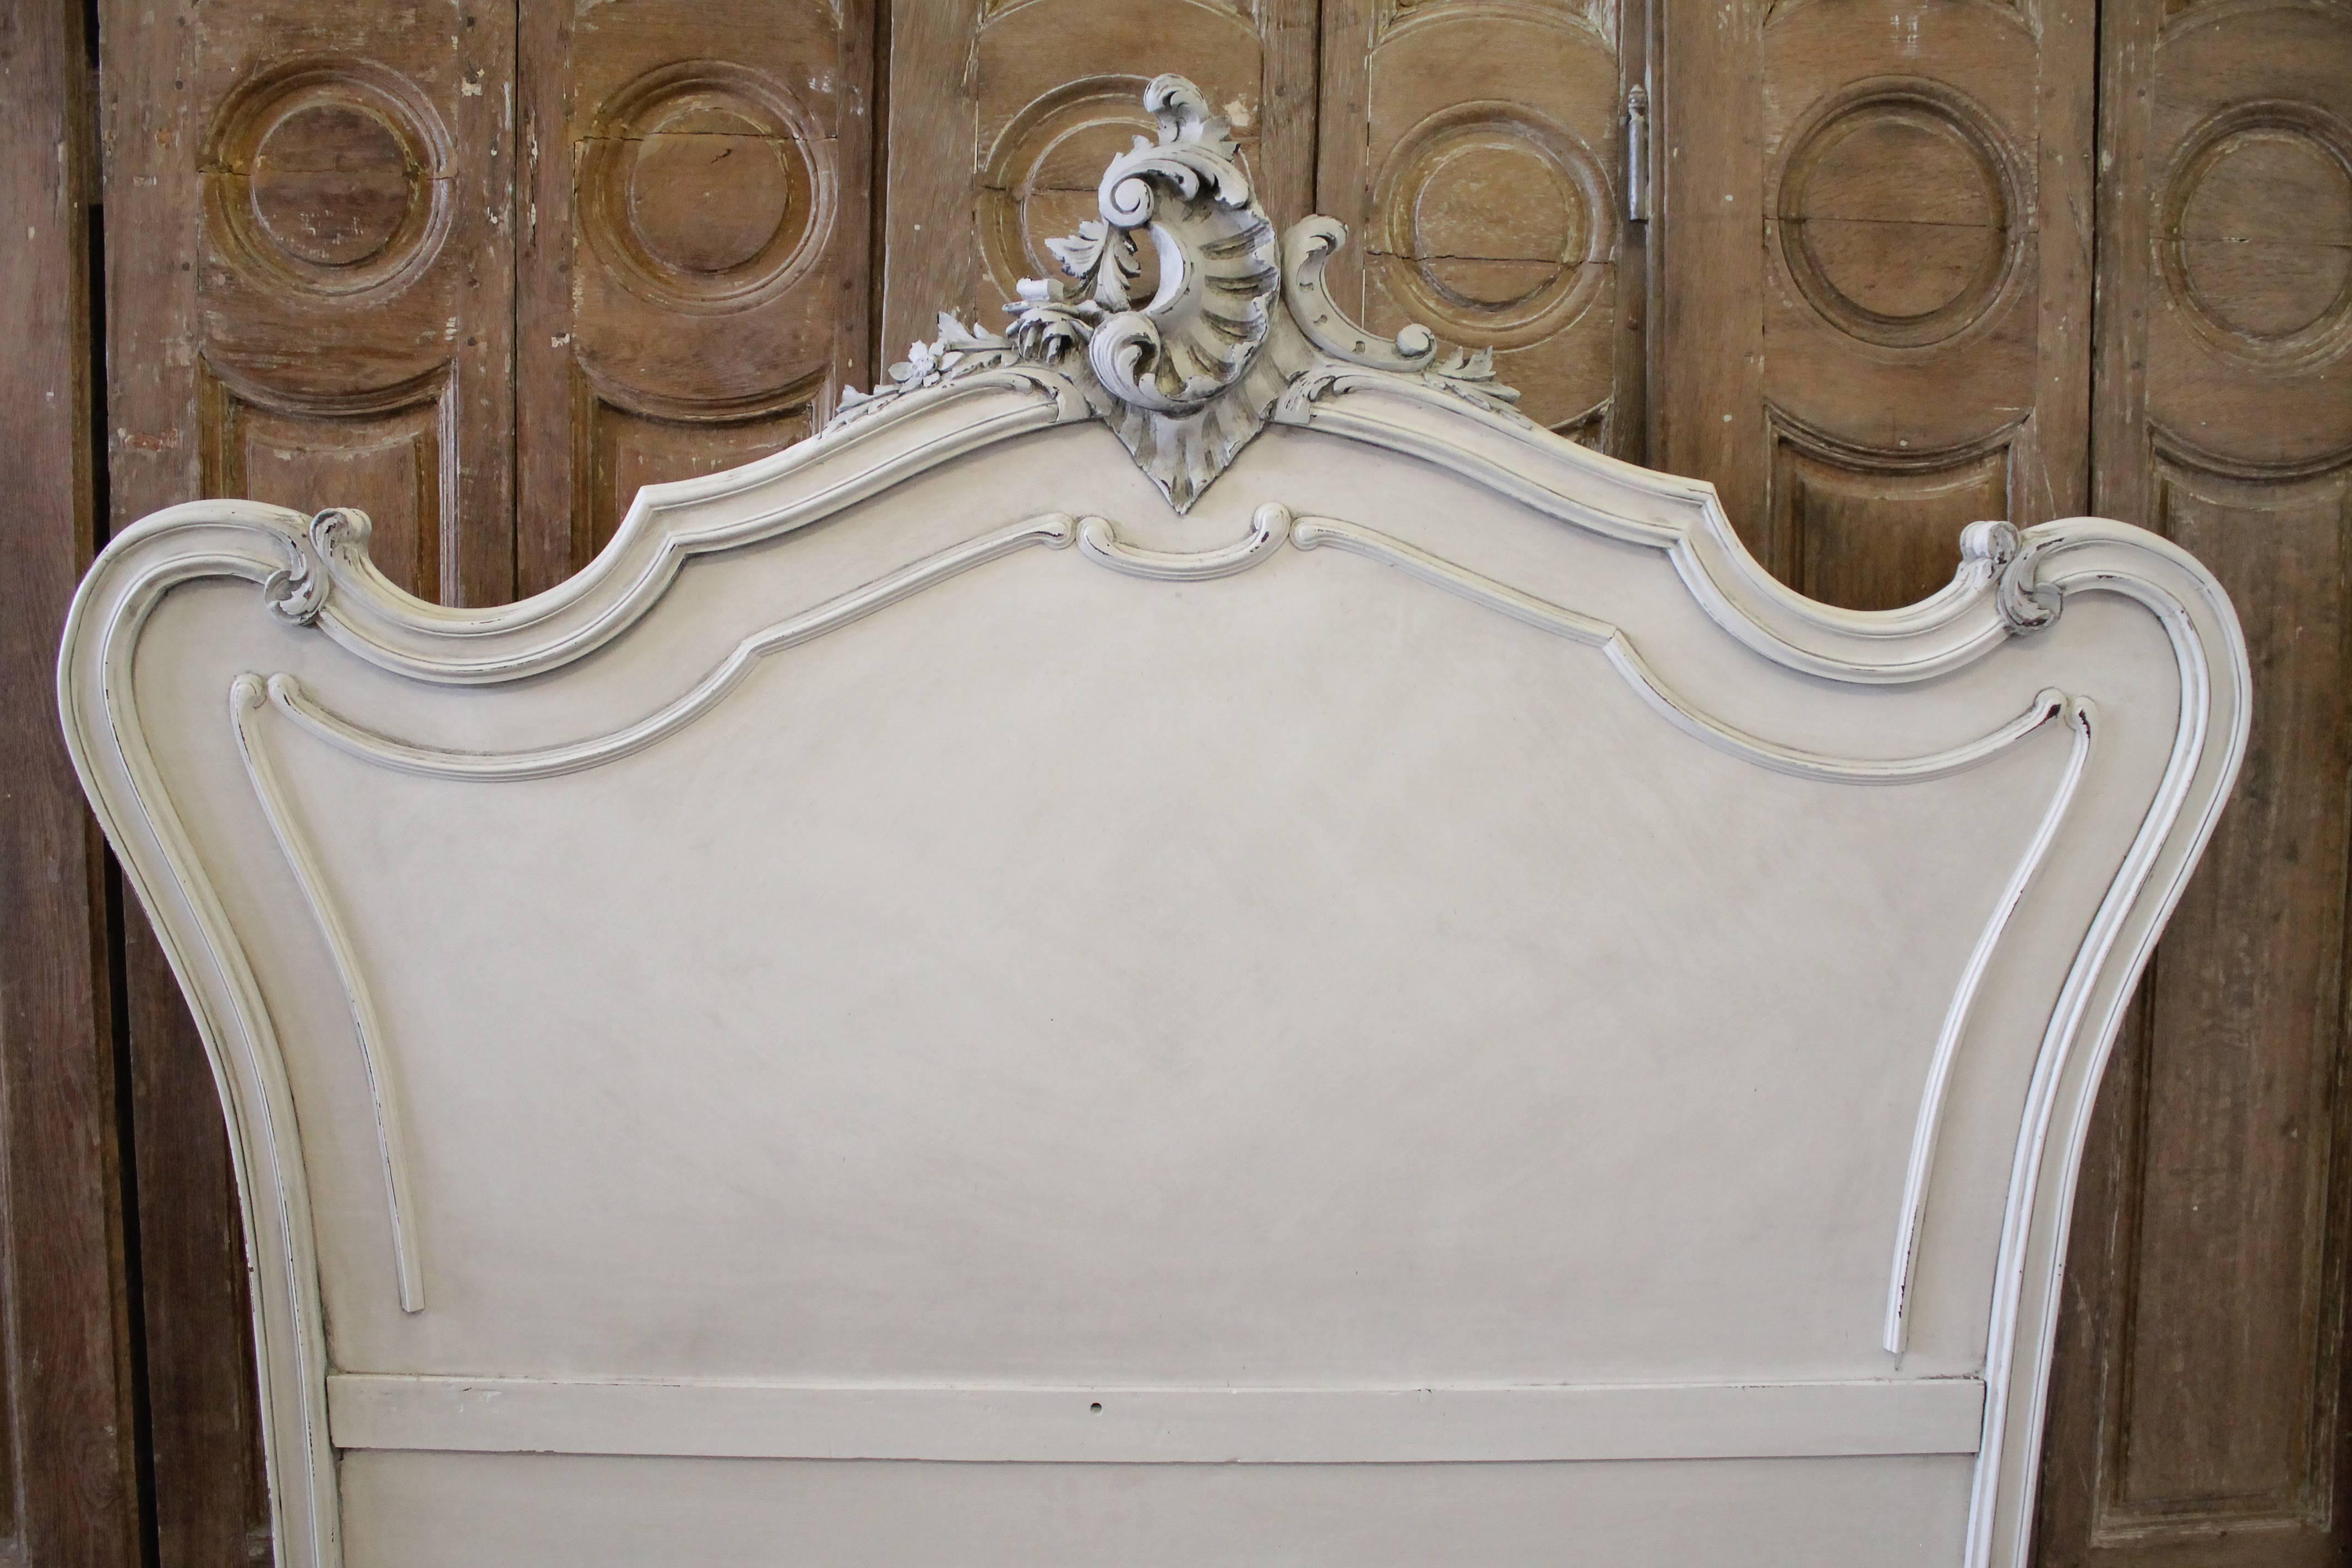 Antique white painted French Louis XV style walnut carved queen French bed
This bed was painted in an antique oyster white color with accents of French grey, slightly distressed patina, and finished with an antique glaze.
A large carved cartouche